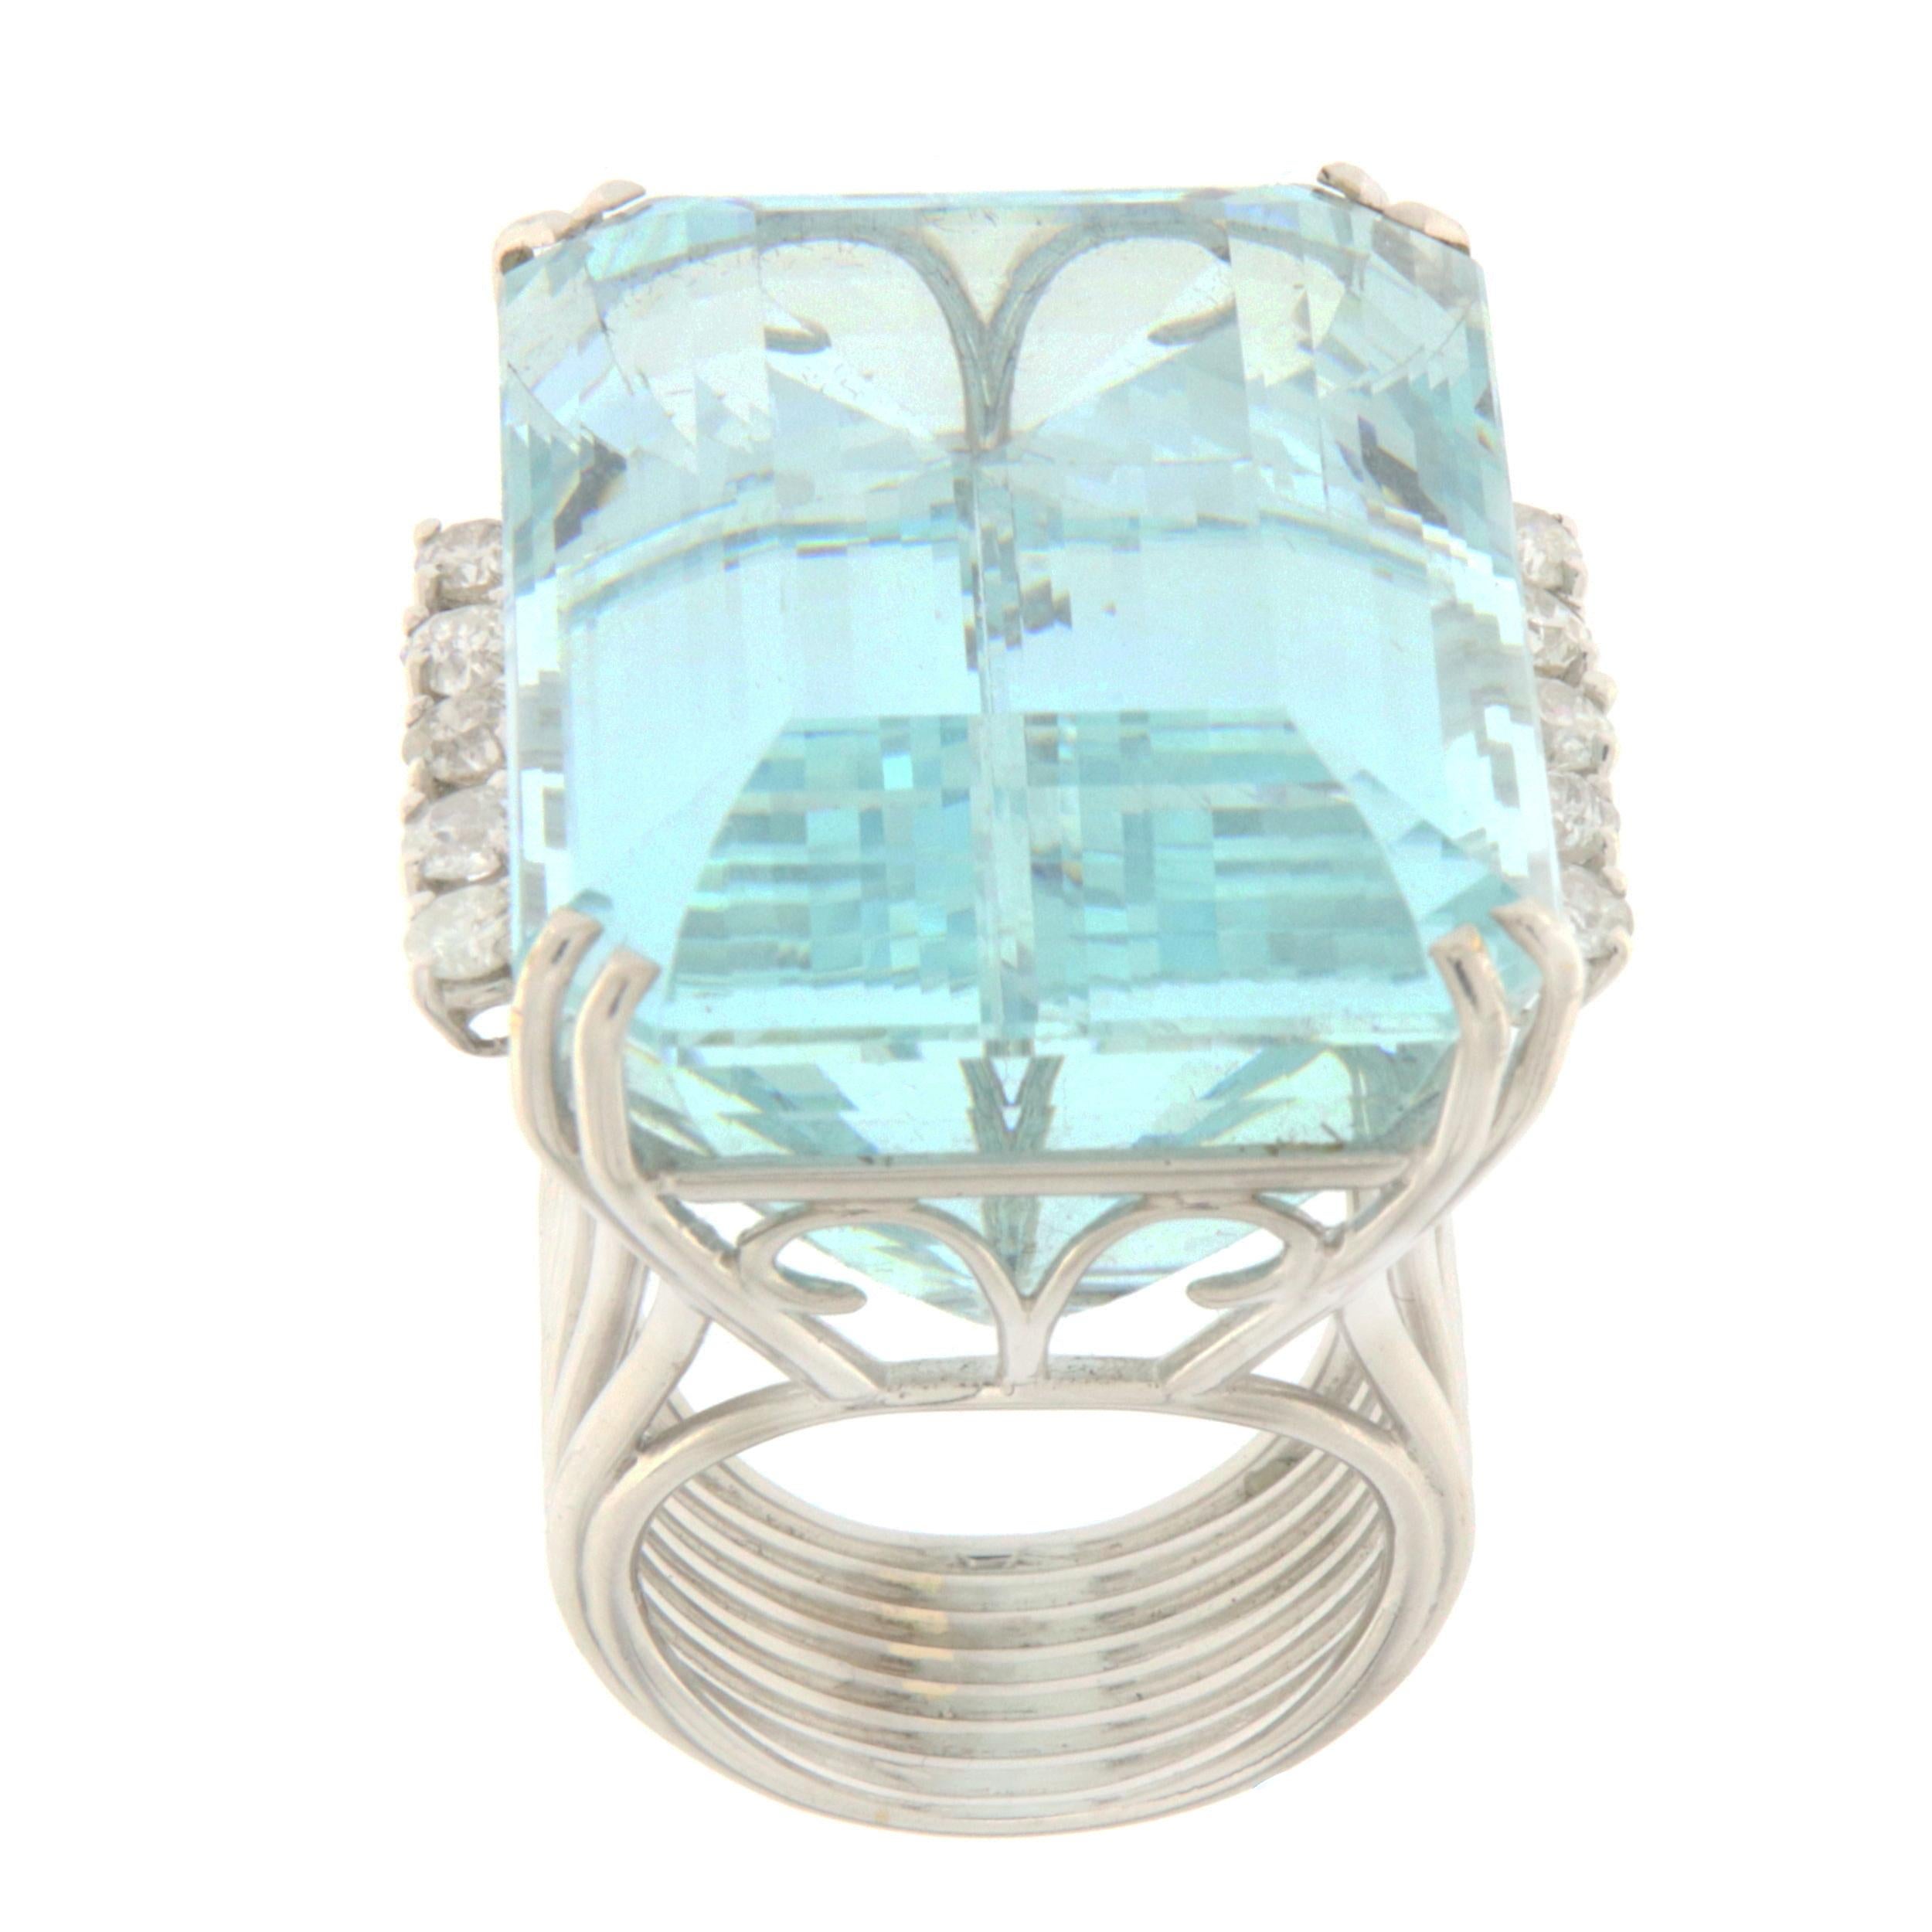 This elegant ring in white gold features a stunning Brazilian aquamarine at its center, chosen for its deep blue color and exceptional clarity, evoking the beauty of Brazil's crystal-clear waters. Framed by a halo of luminous diamonds, the central